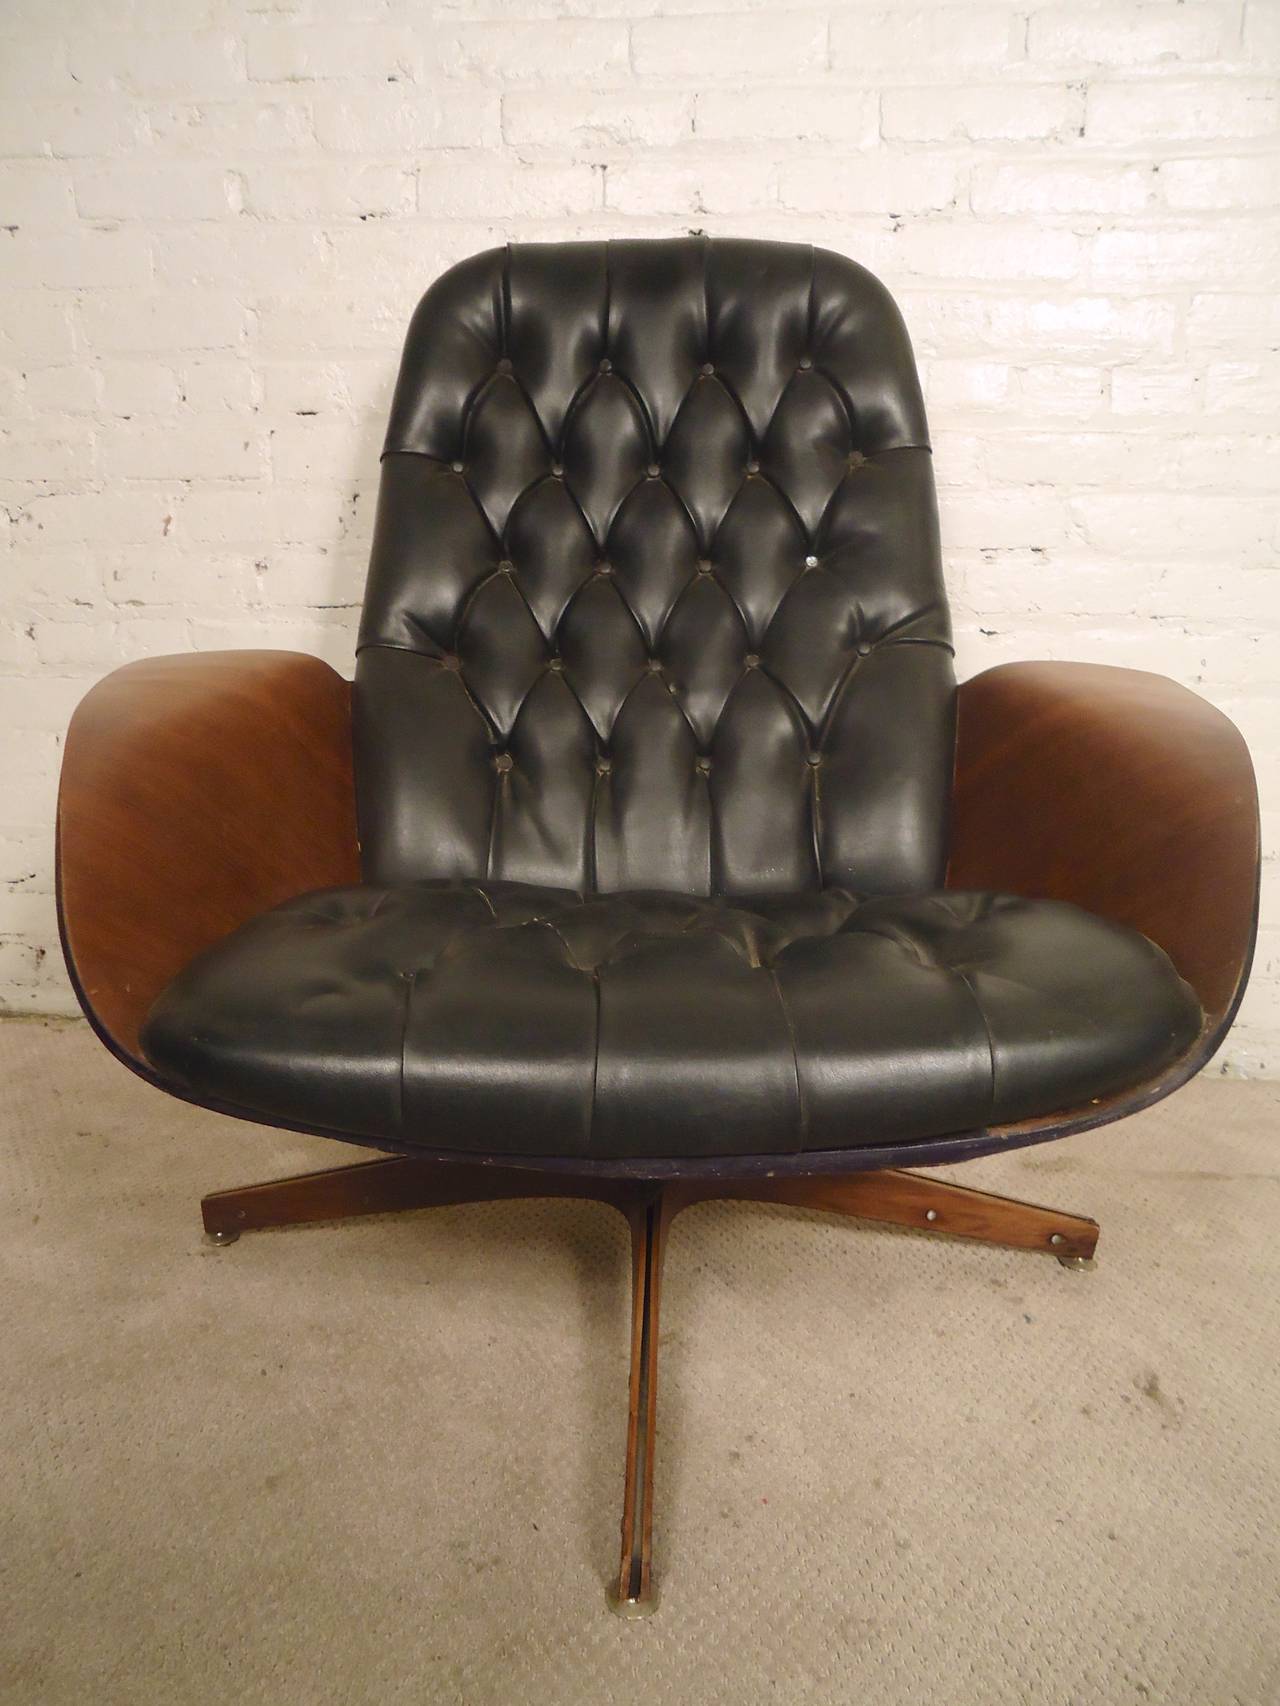 Eames era tufted lounge chair made by Plycraft with attractive bentwood arms and back. Matching ottoman, swivel bases, comfortable vinyl covering.

(Please confirm item location - NY or NJ - with dealer)